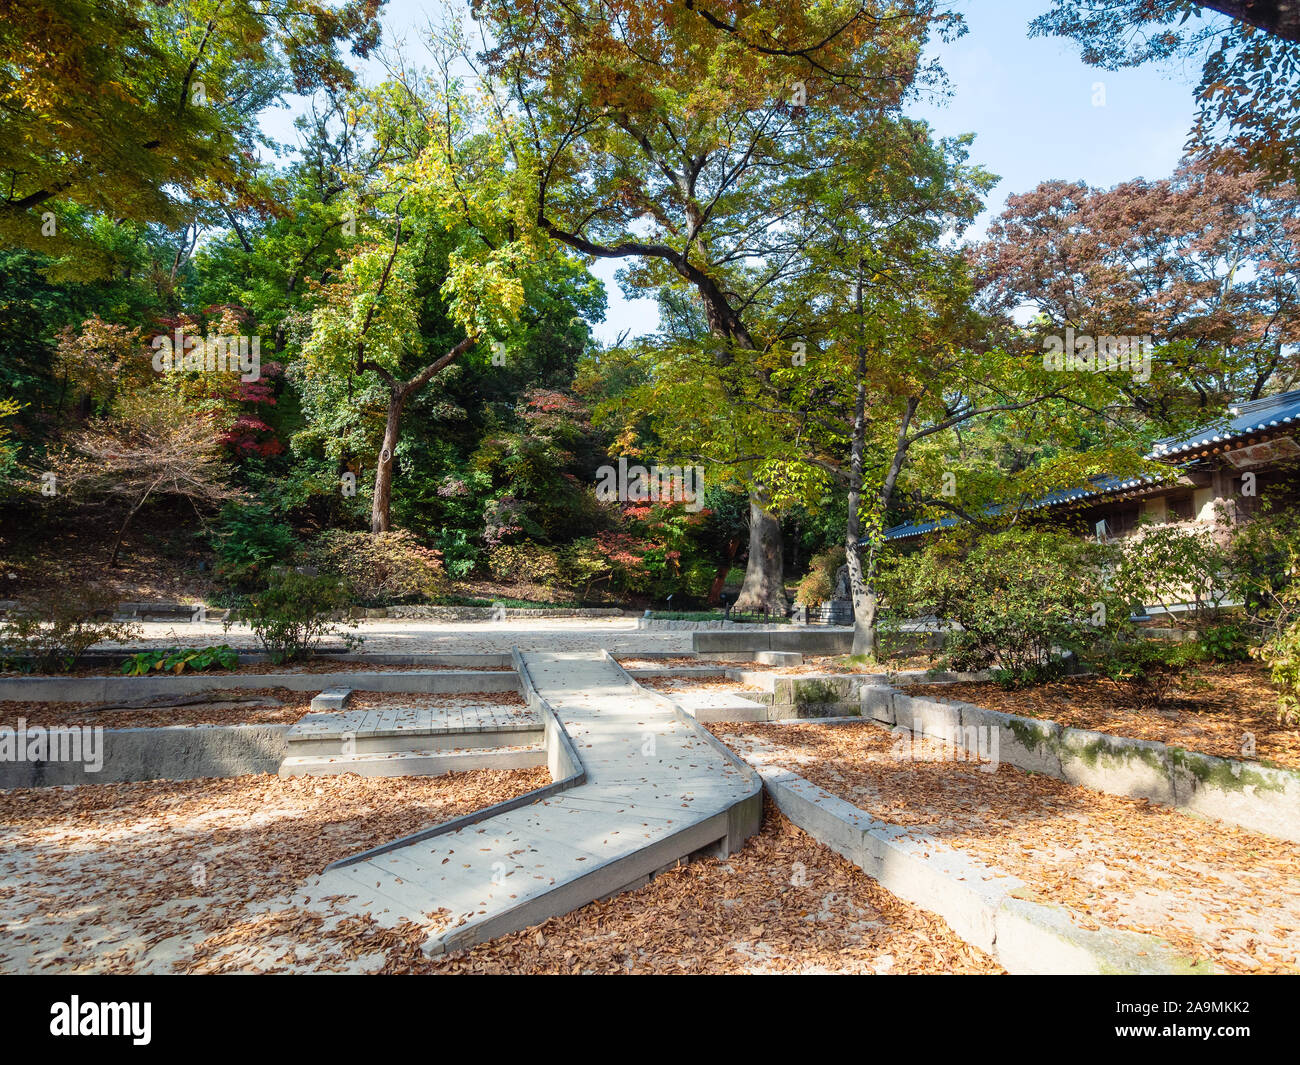 SEOUL, SOUTH KOREA - OCTOBER 31, 2019: pathes covered by fallen leaves in courtyard of Yeongyeongdang residence in Huwon Secret Rear Garden of Changde Stock Photo